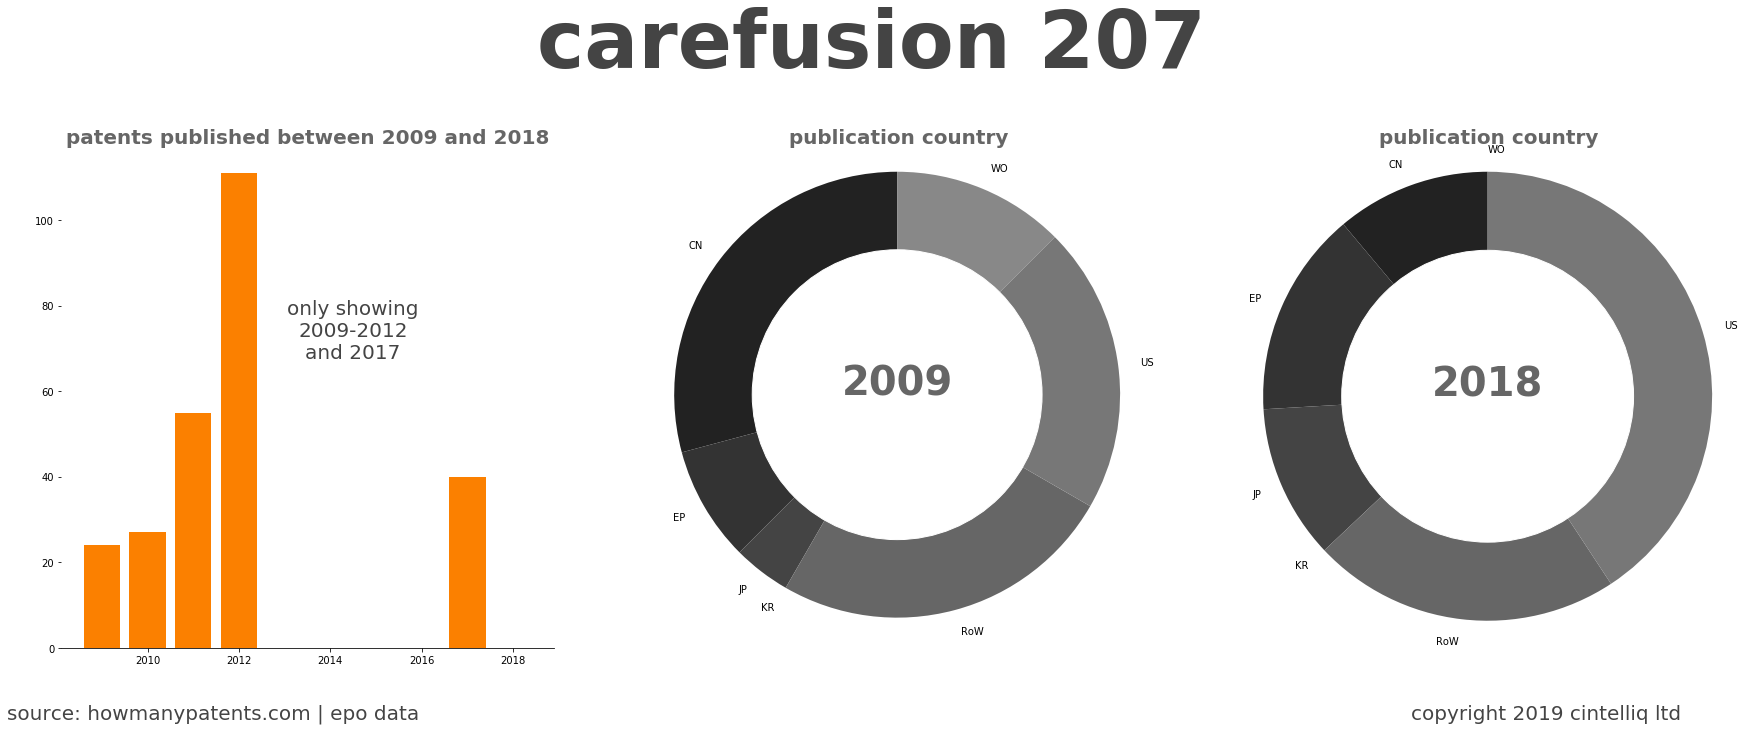 summary of patents for Carefusion 207